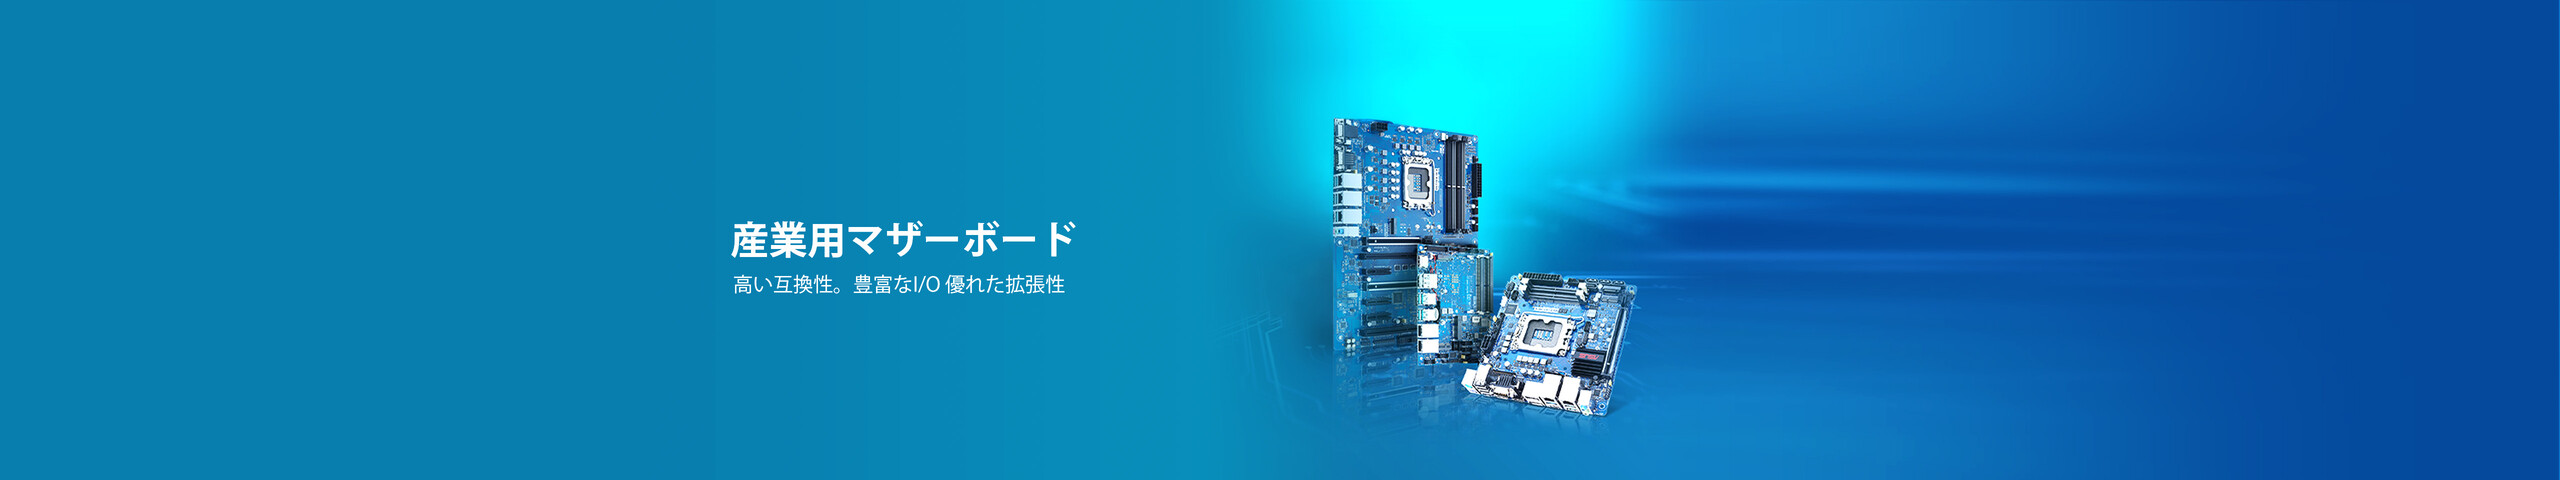 Different sizes of motherboards combination